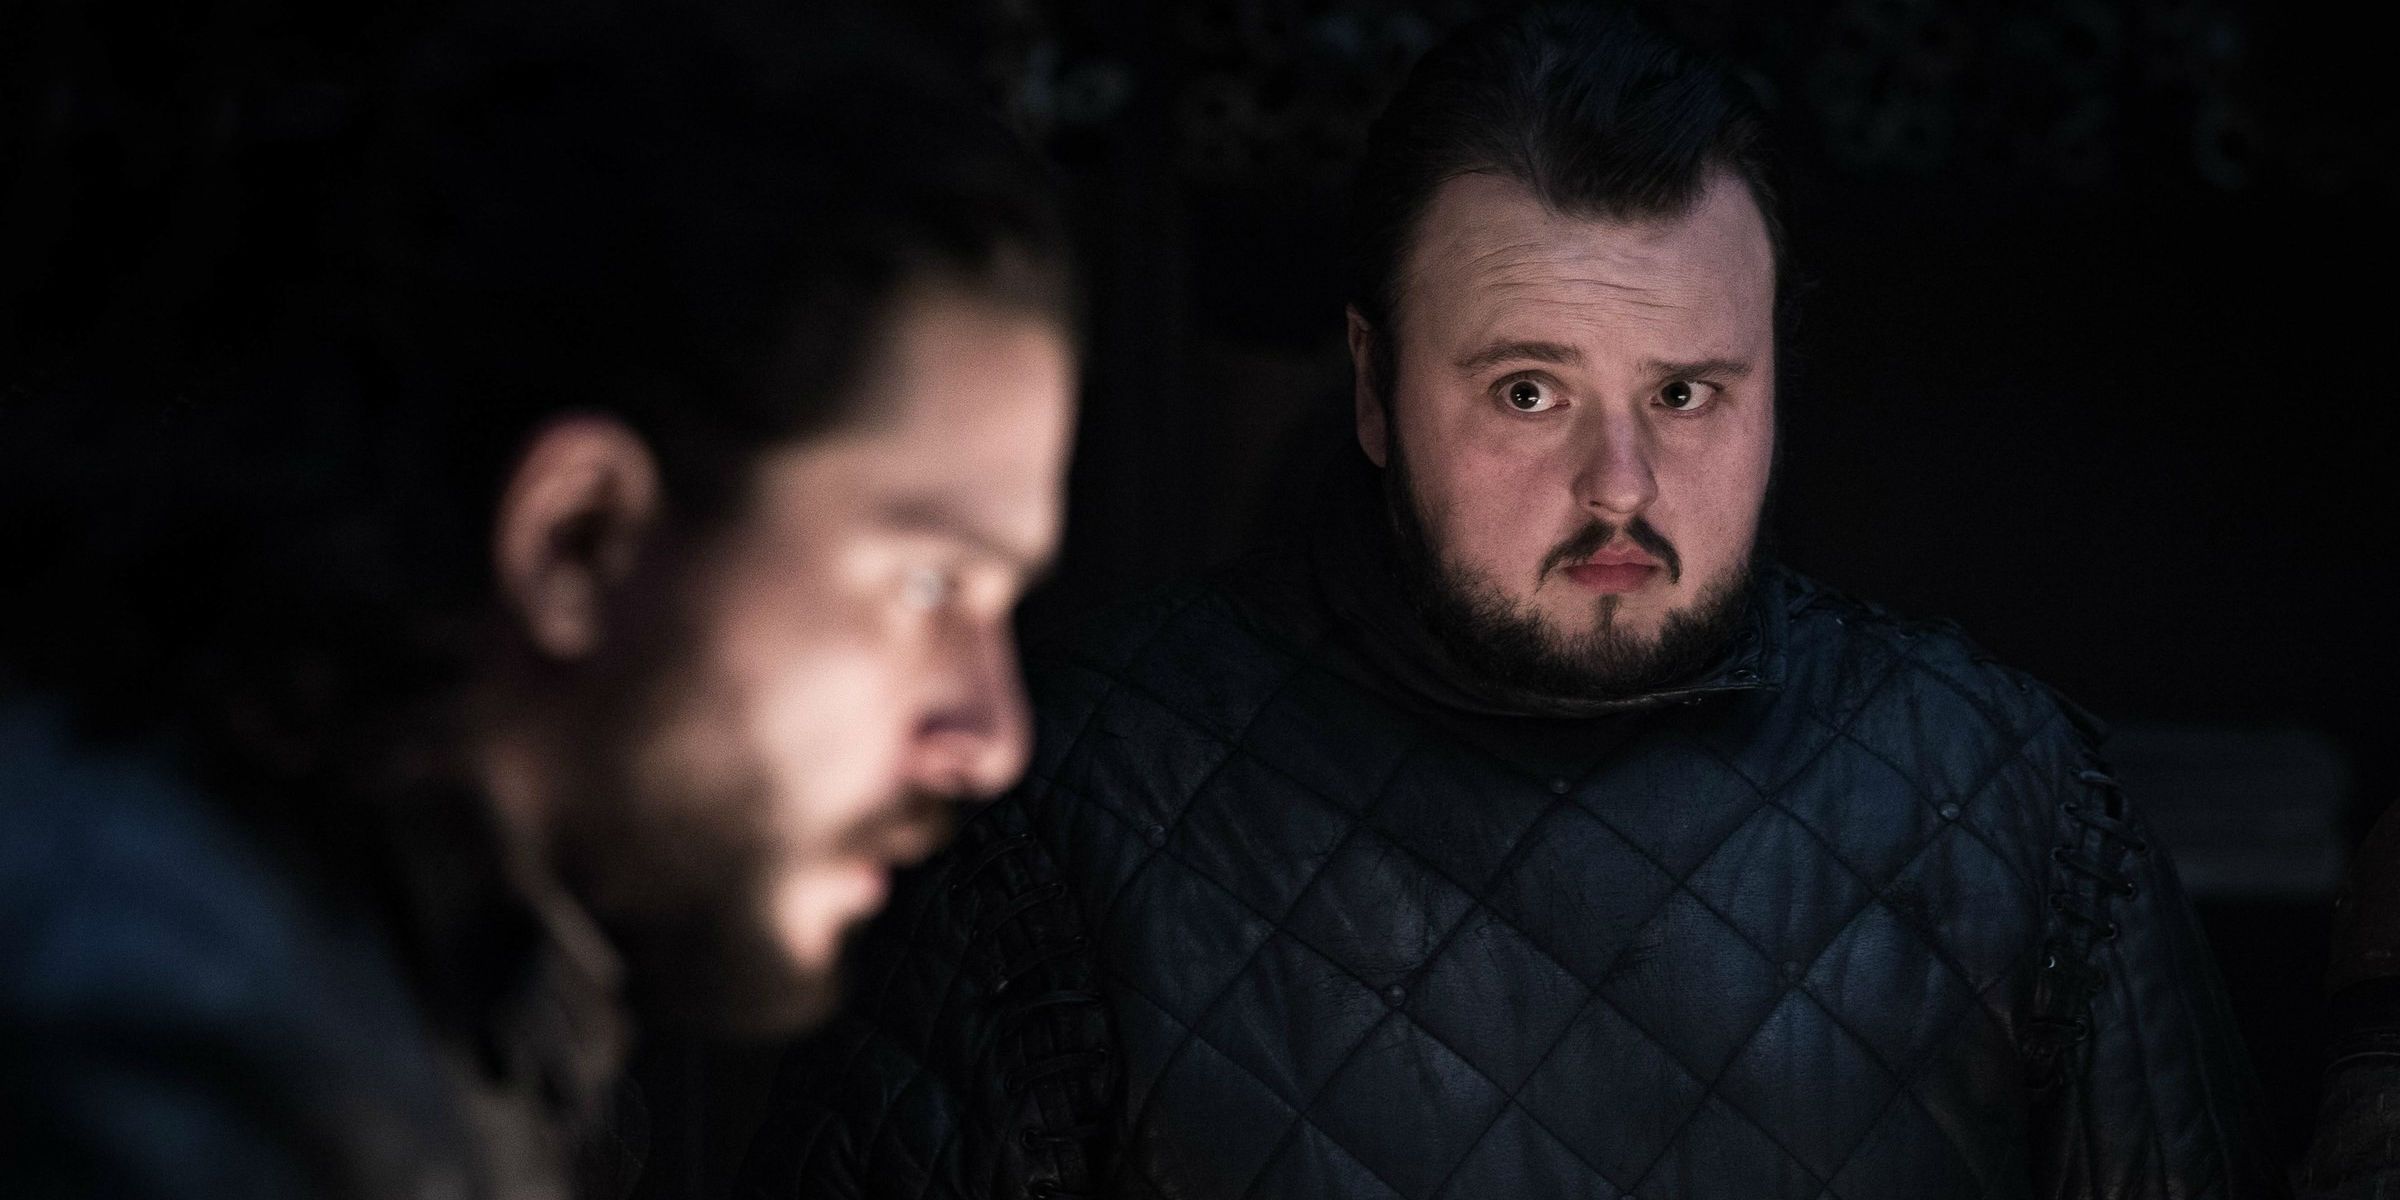 Game of Thrones Samwell Tarlys 10 Biggest Mistakes (That We Can Learn From)